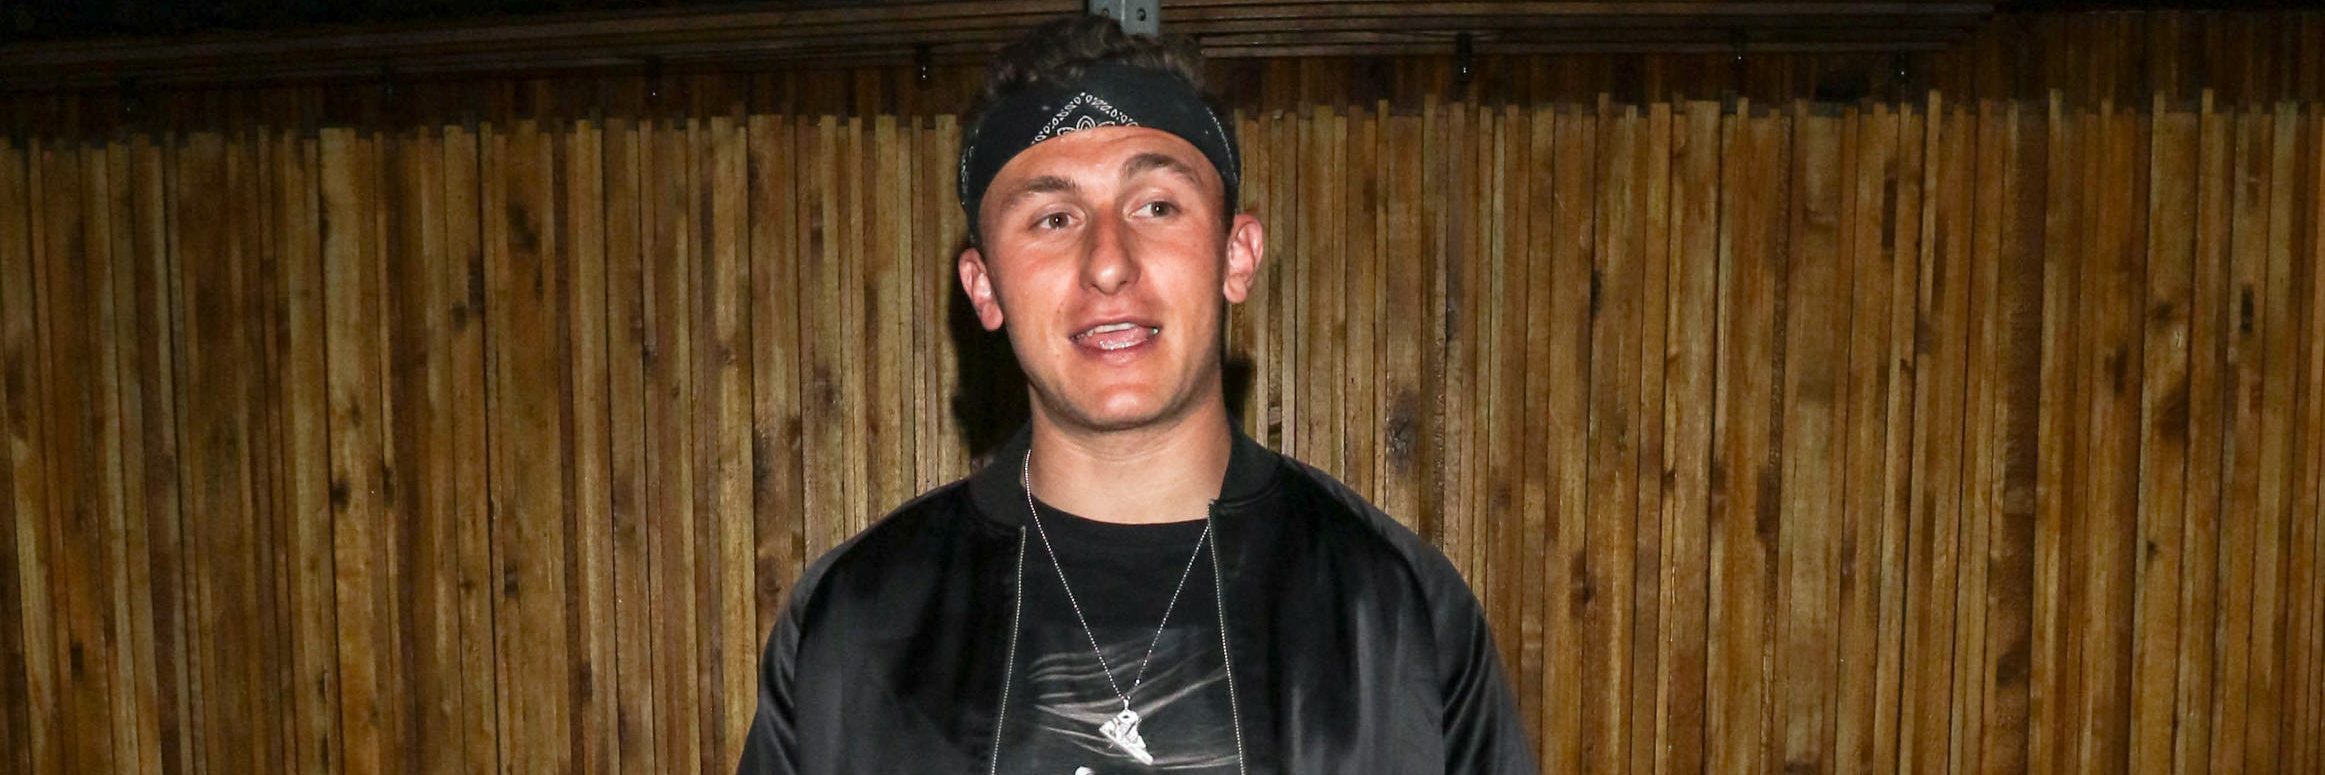 Johnny Manziel is seen on March 10, 2018 in Los Angeles, California.  (Photo by gotpap/Bauer-Griffin/GC Images)